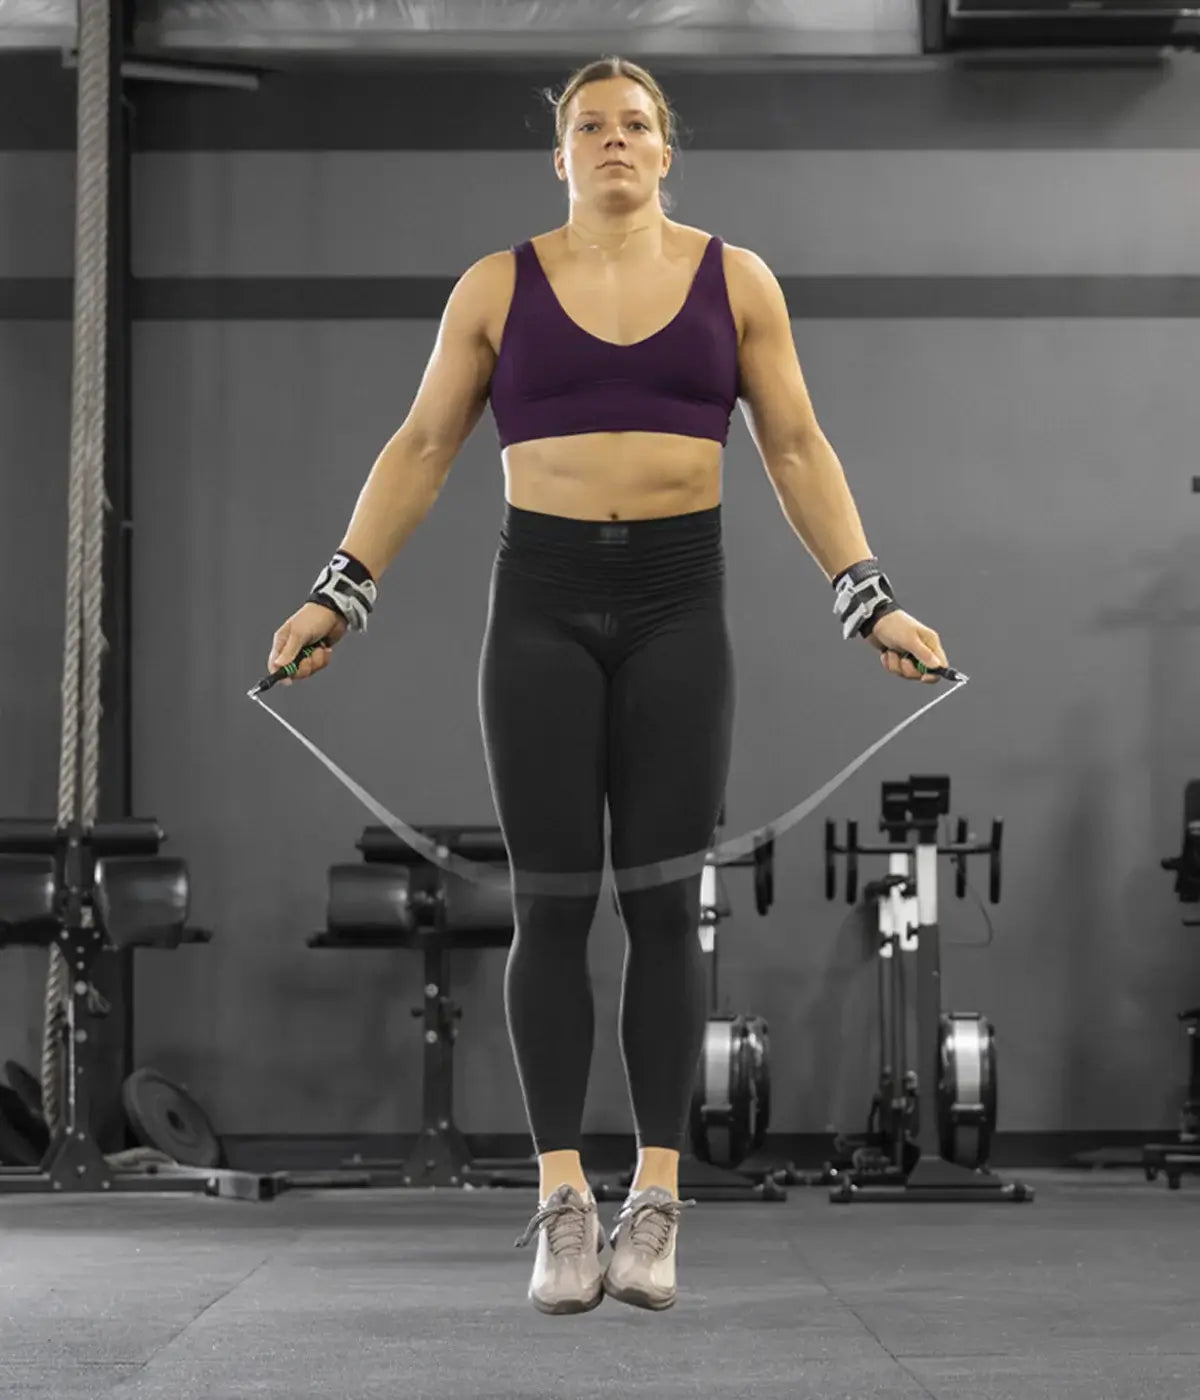 Laura_Horvath_favorite speed rope is the_Rx Smart Gear EVO G2